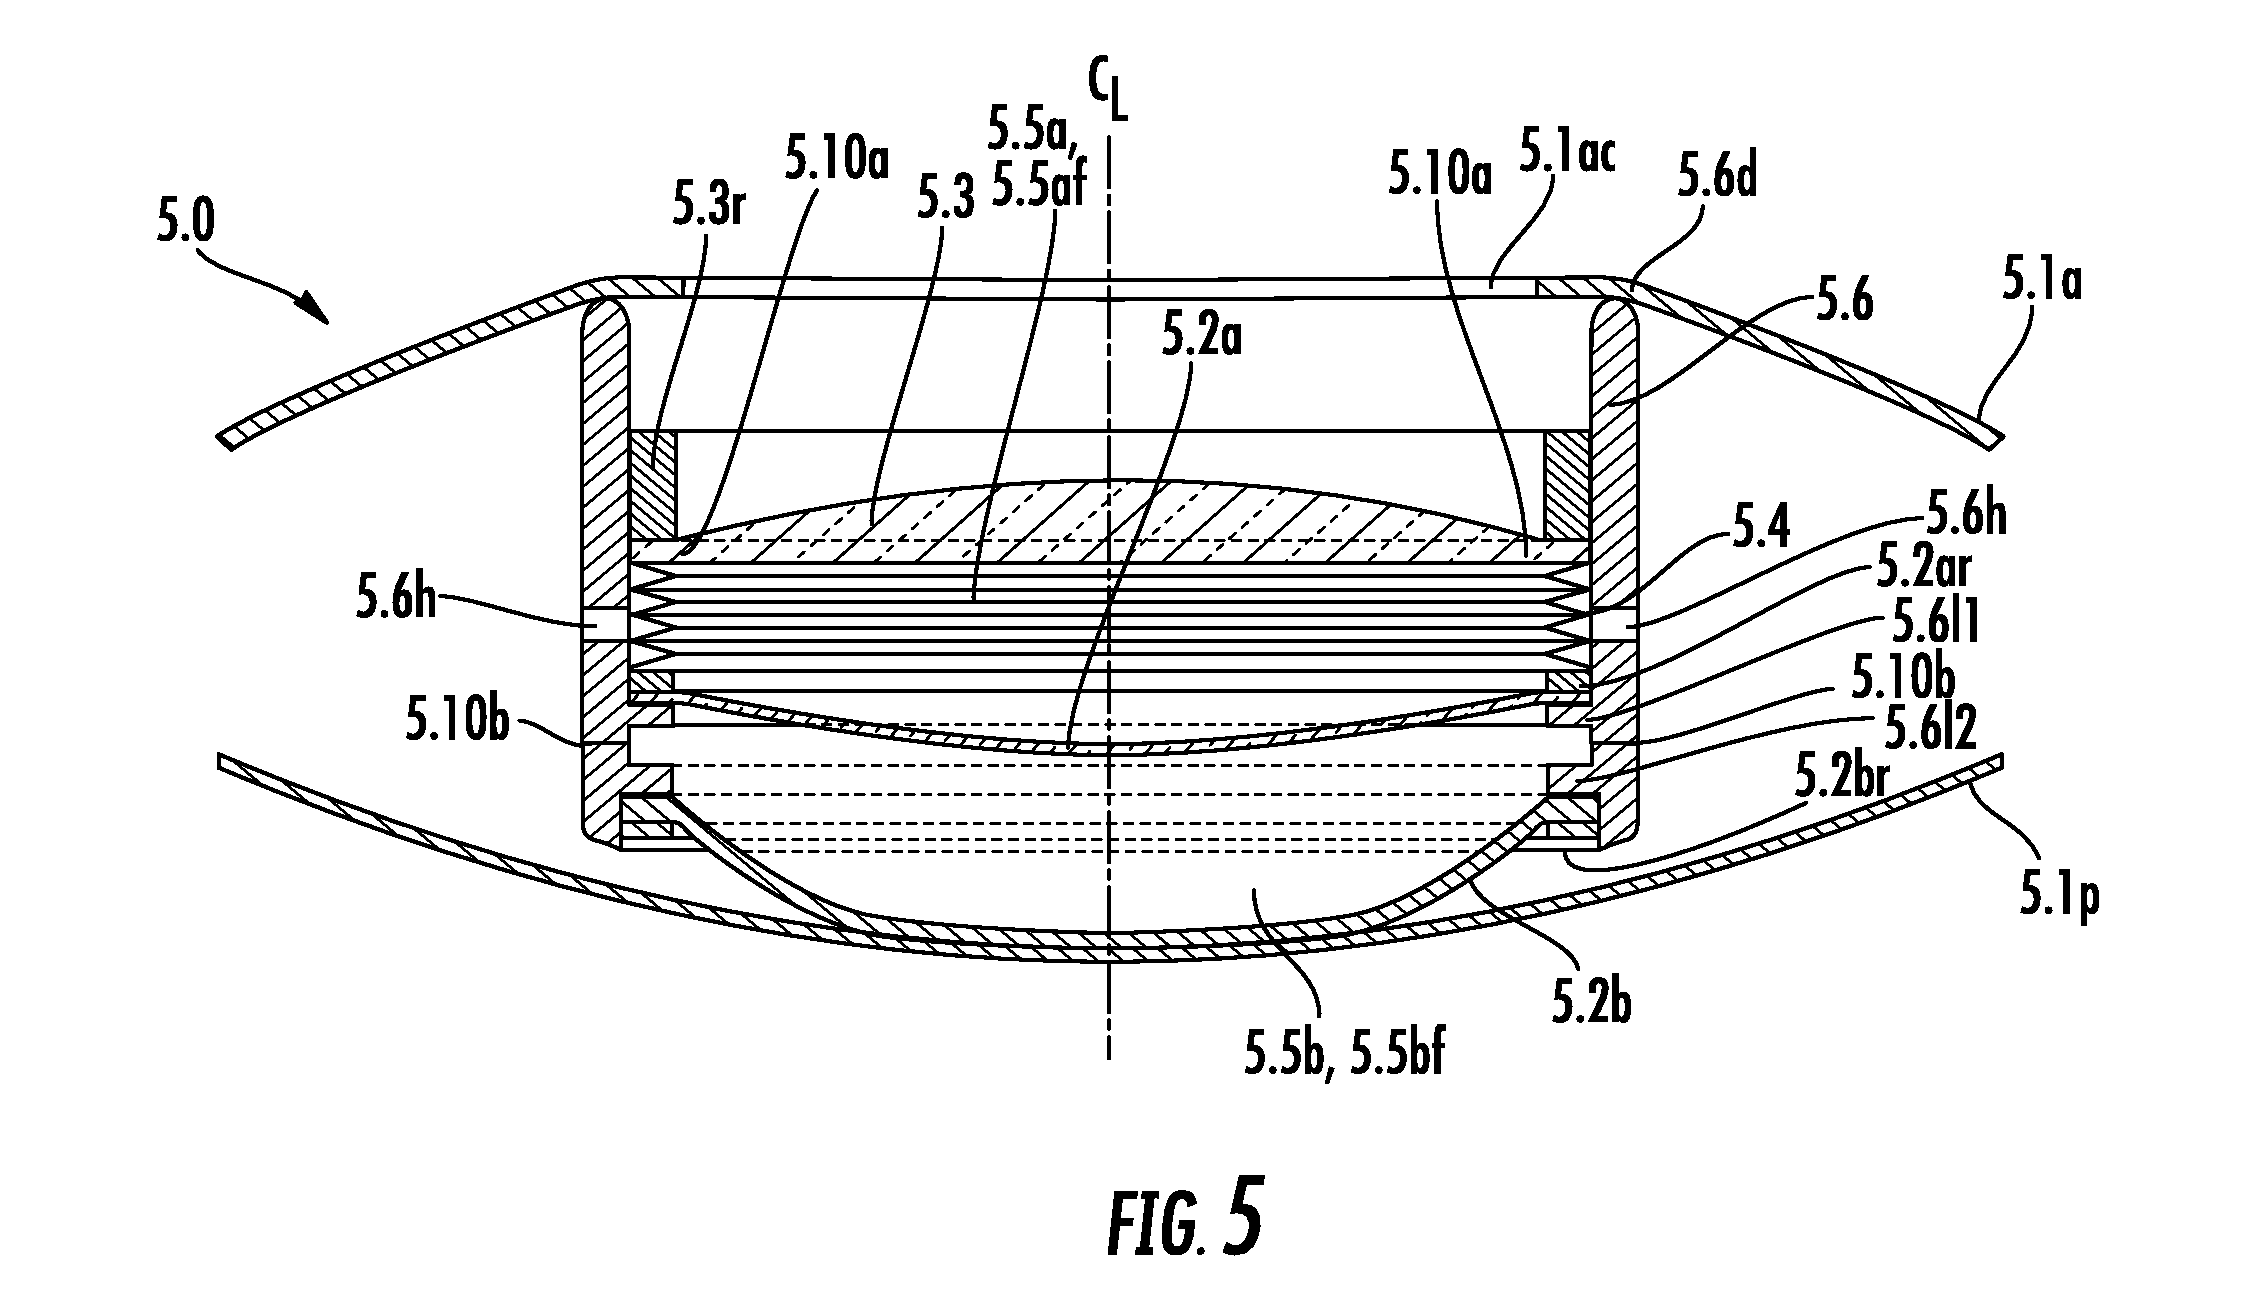 Anterior-Posterior-Capsule-Actuated Hydraulic Accommodative Intraocular Lenses and Lens Systems